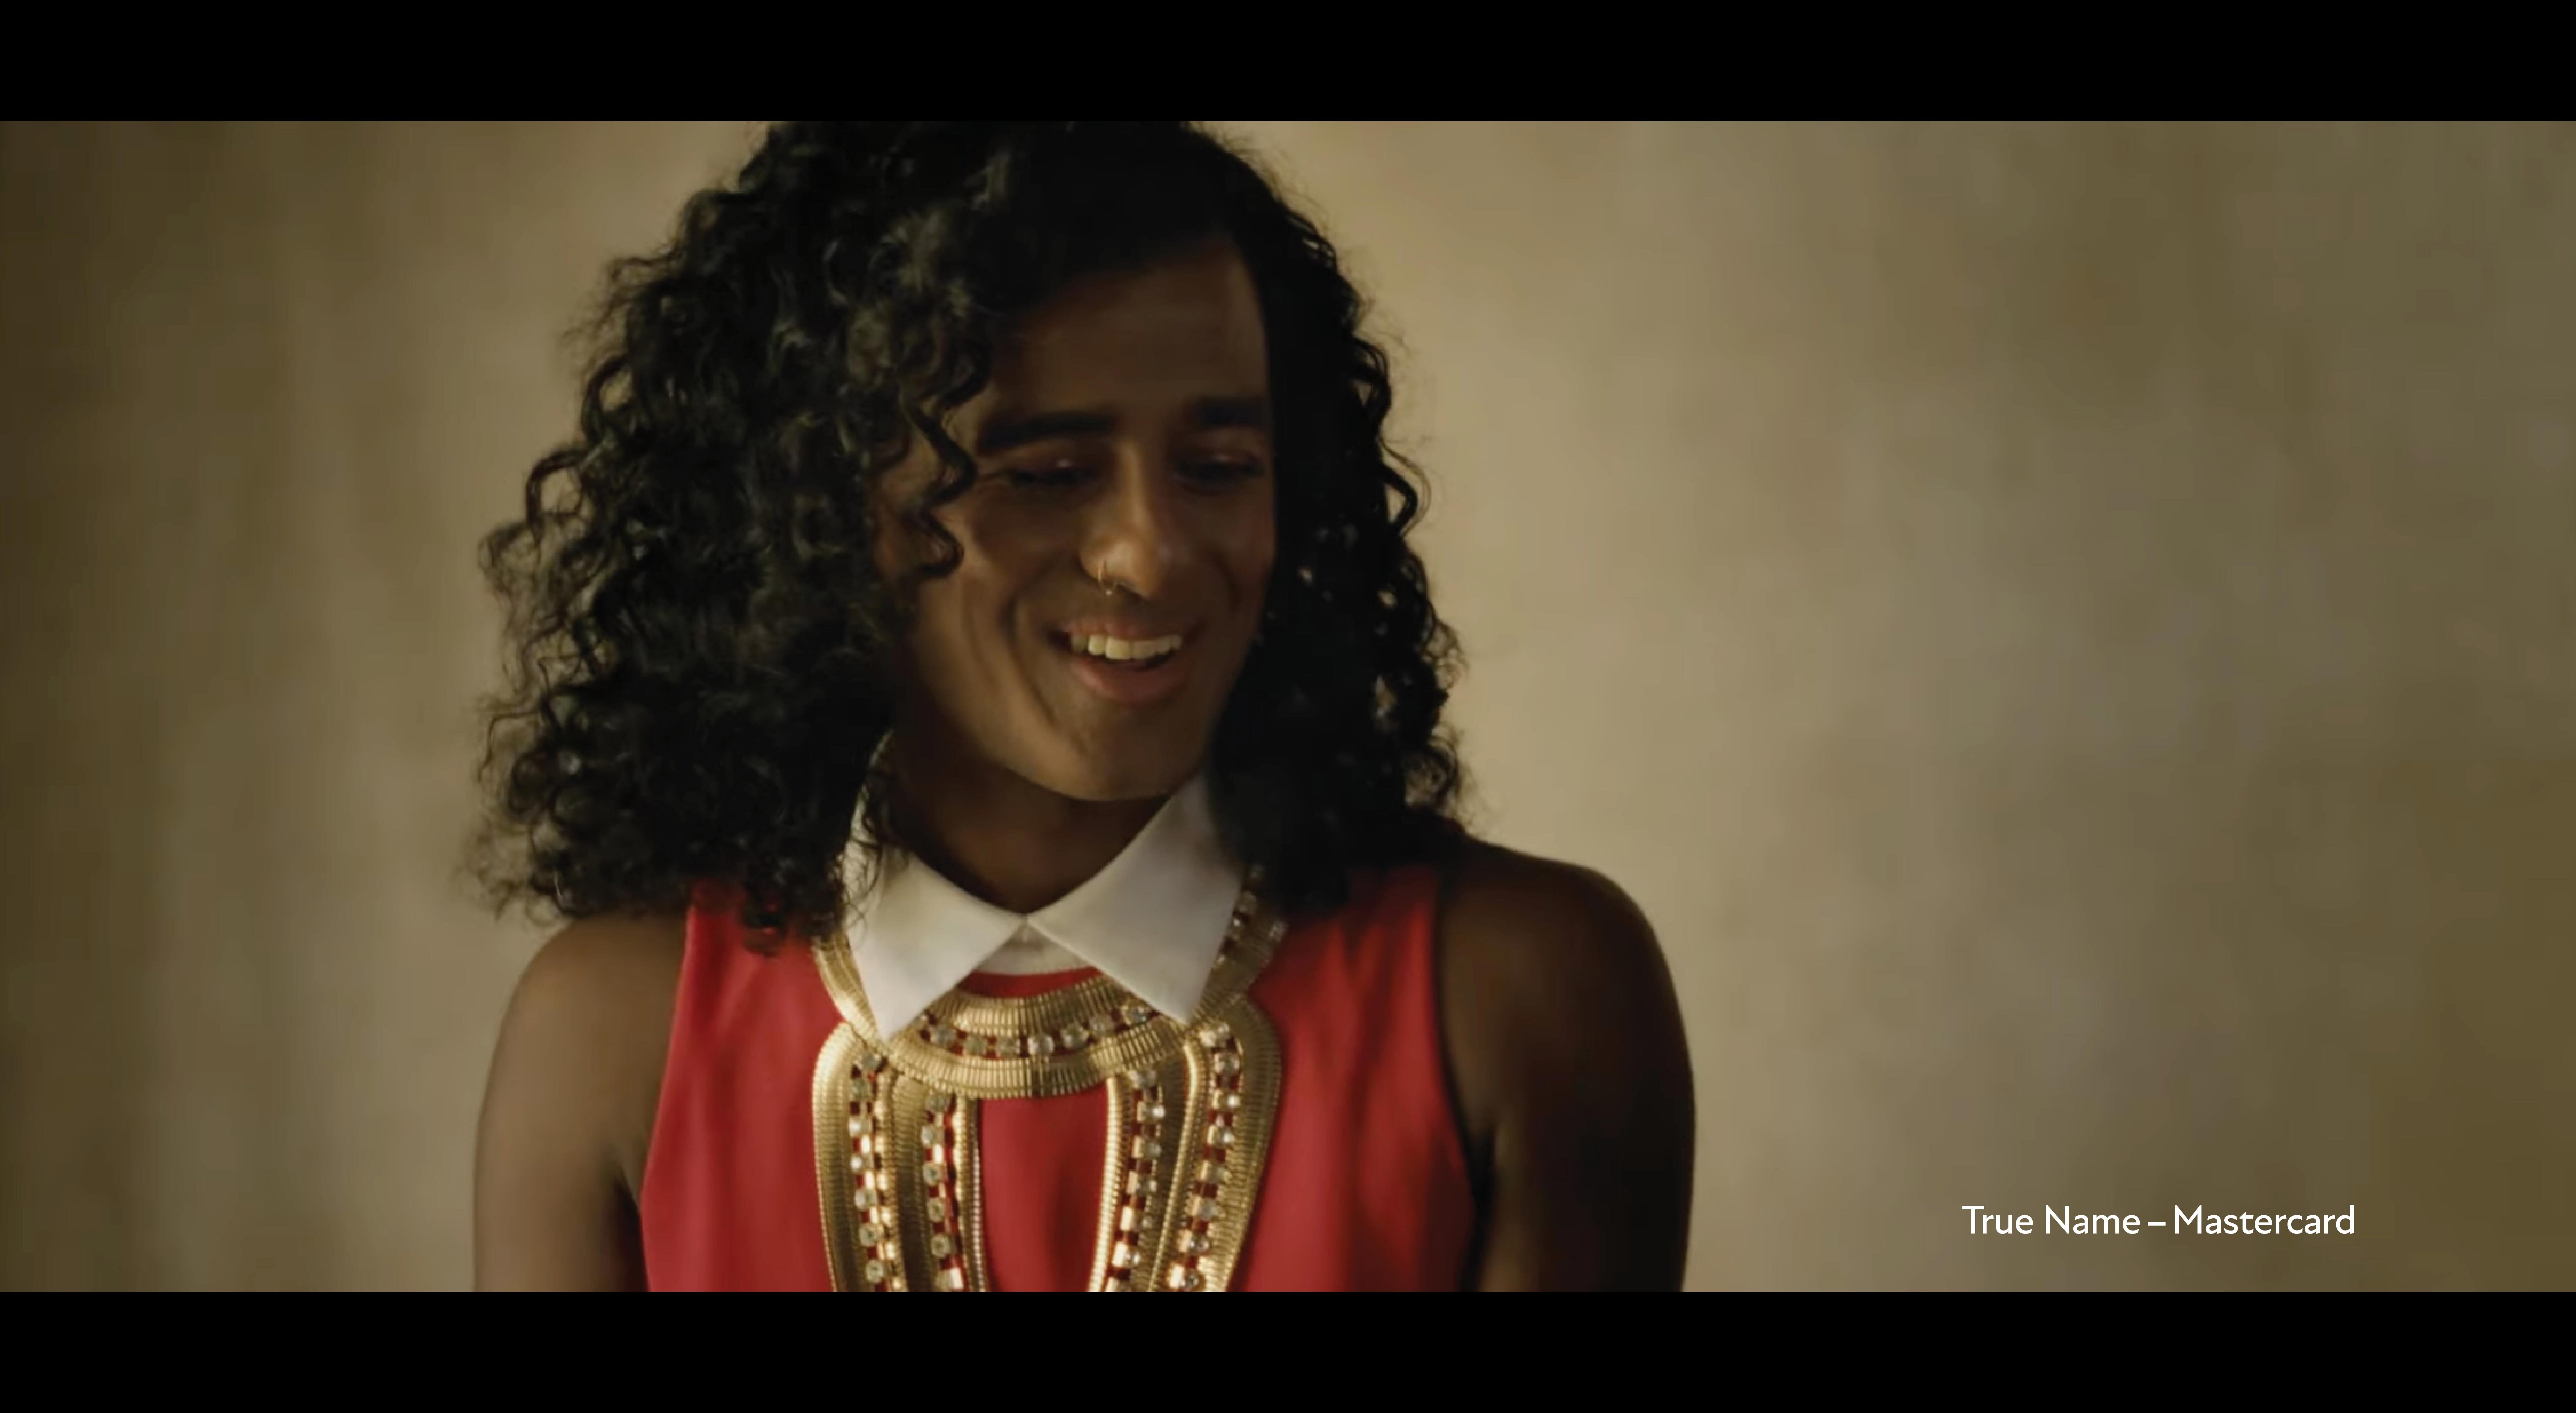 Screen grab from MasterCard advertisement showing a person with curly hair smiling